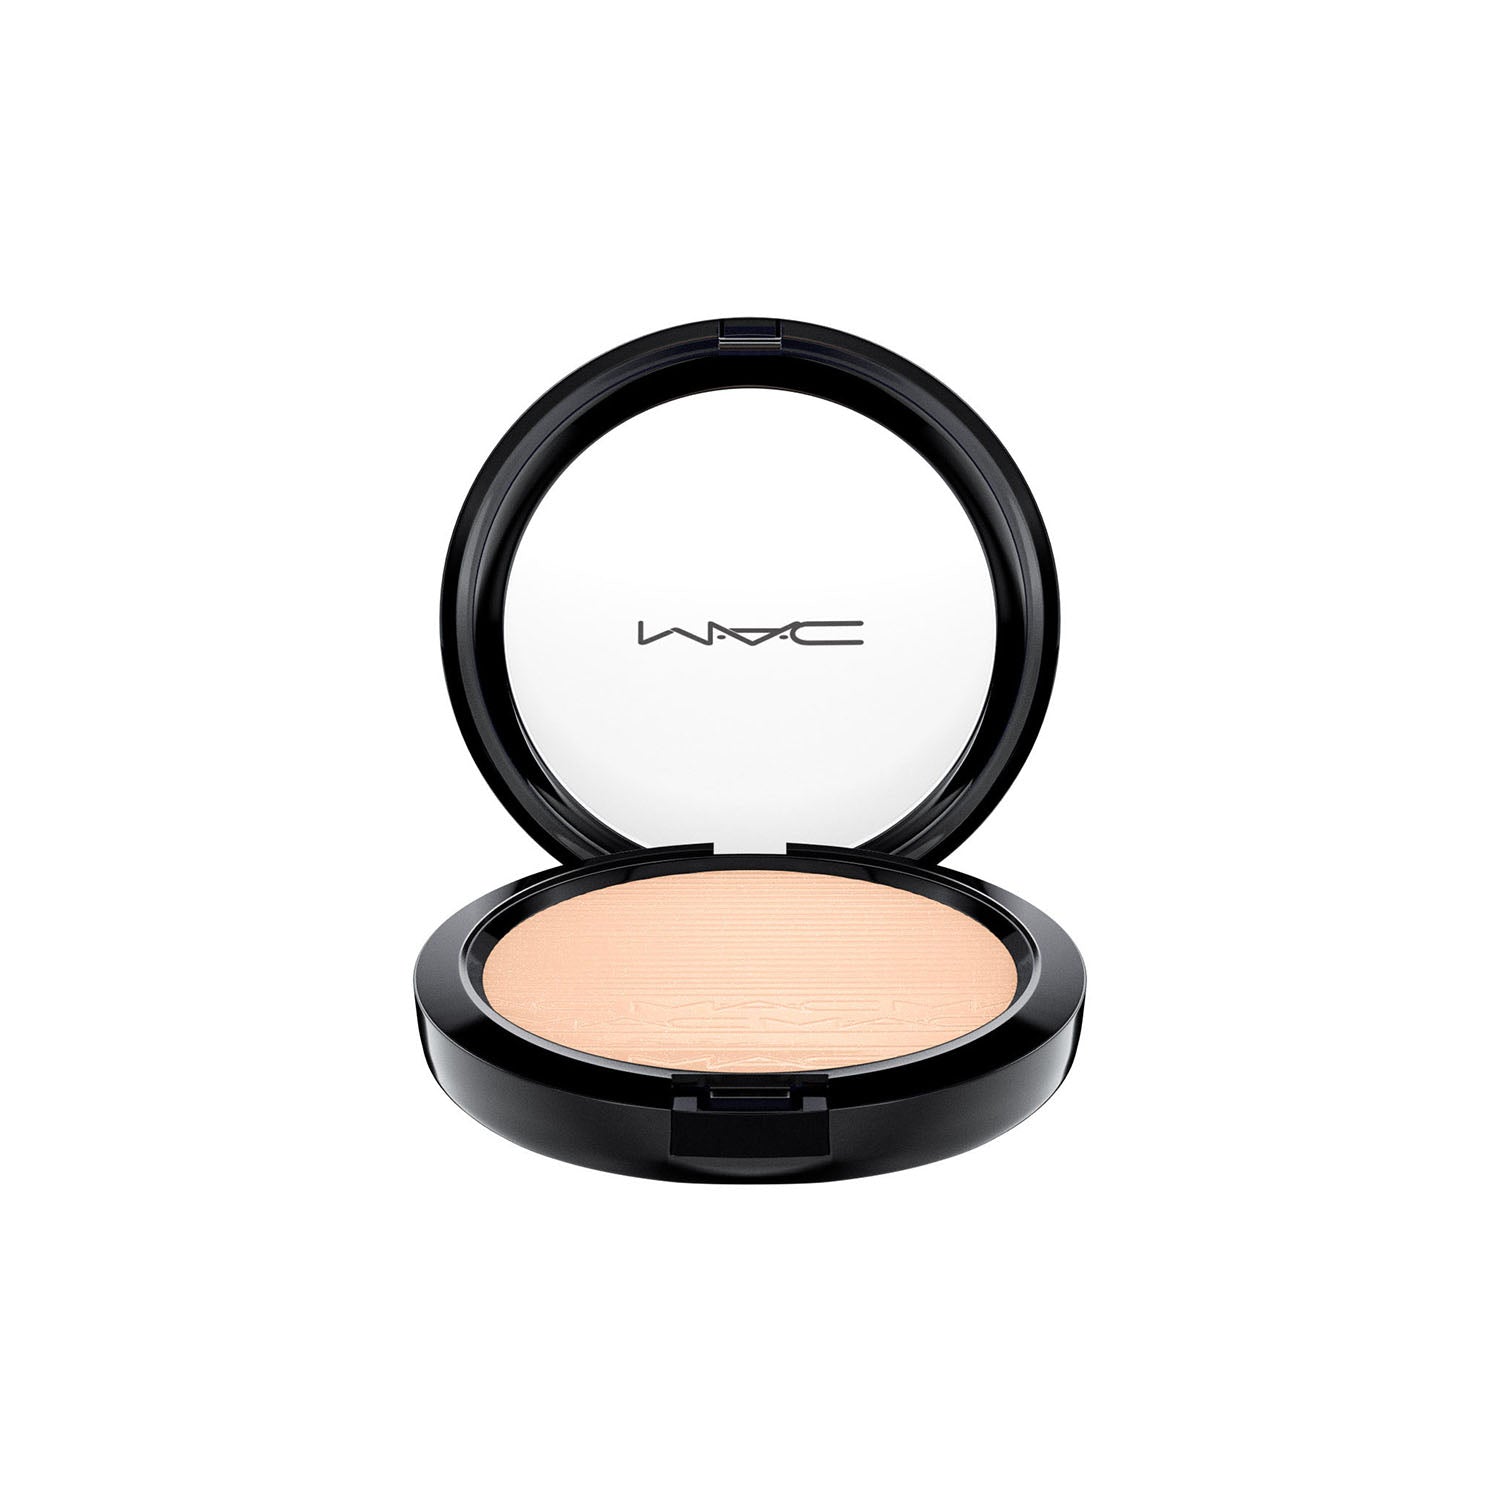 M·A·C Extra Dimension Skinfinish